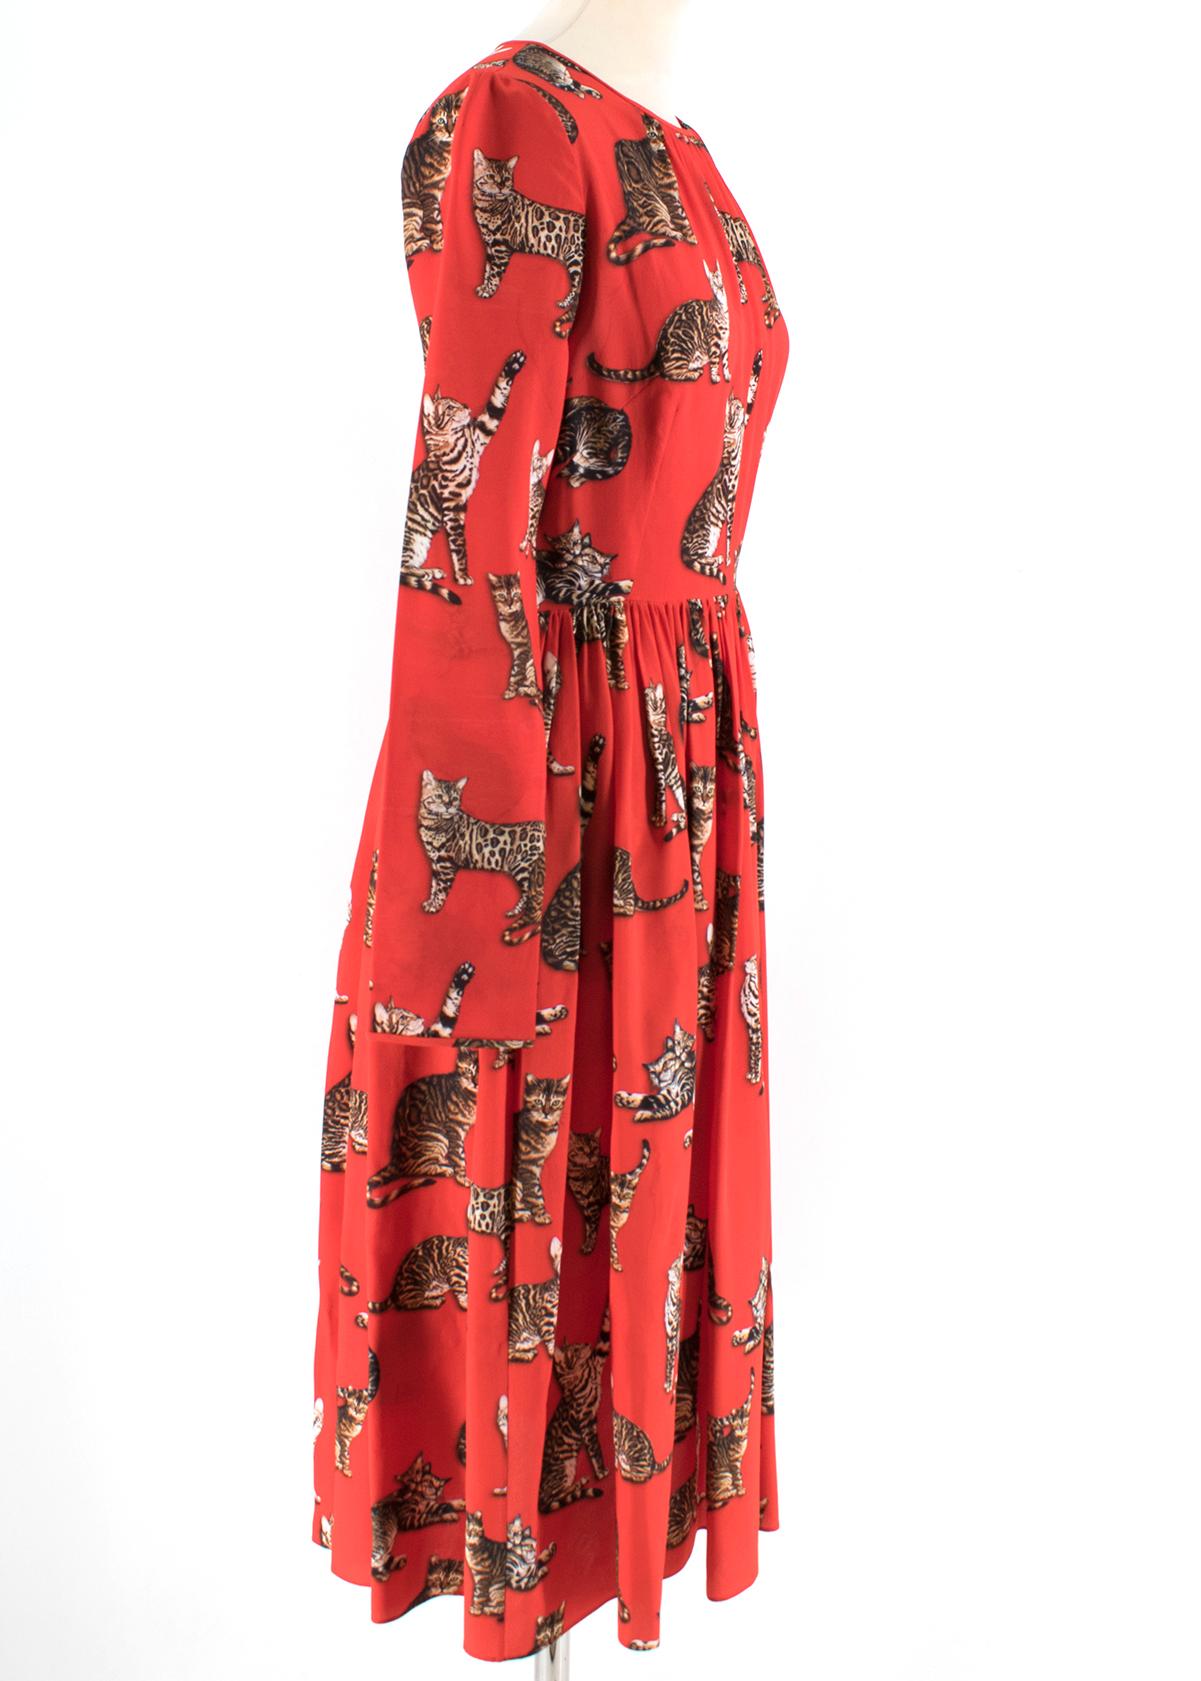 Dolce & Gabbana Red Cat Print Silk Dress 

- Red Cat Print Dress
- 100% Stretch Silk 
- Round neck, long sleeved
- Concealed rear zip fastening
- Pleated skirt, knee length

Please note, these items are pre-owned and may show some signs of storage,